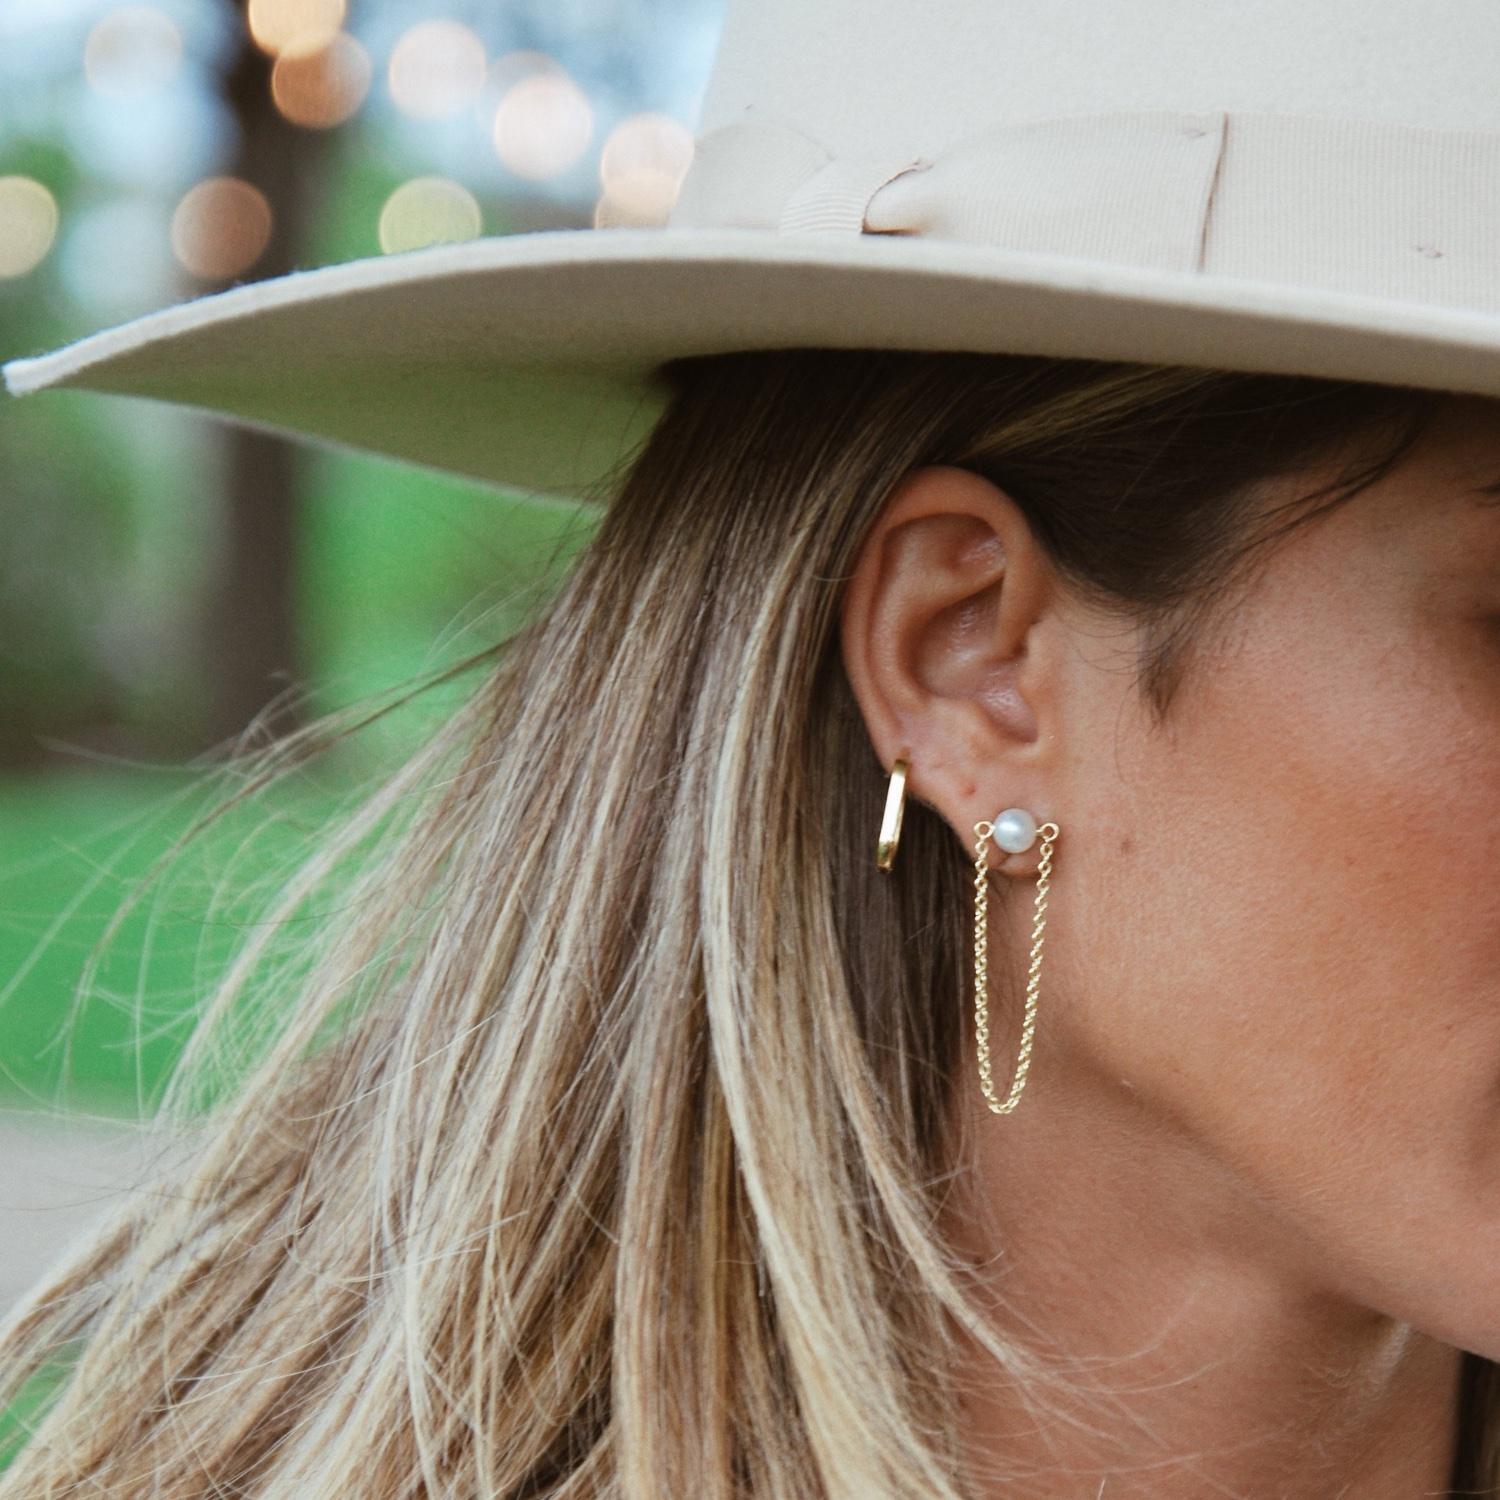 Our Veil Earrings include a chain drape moment for a fresh and modern take on the classic pearl stud design. 

These earrings can also be incorporated into our Infinity Earrings to spice up your every day look. We love a subtly mismatched pair, so